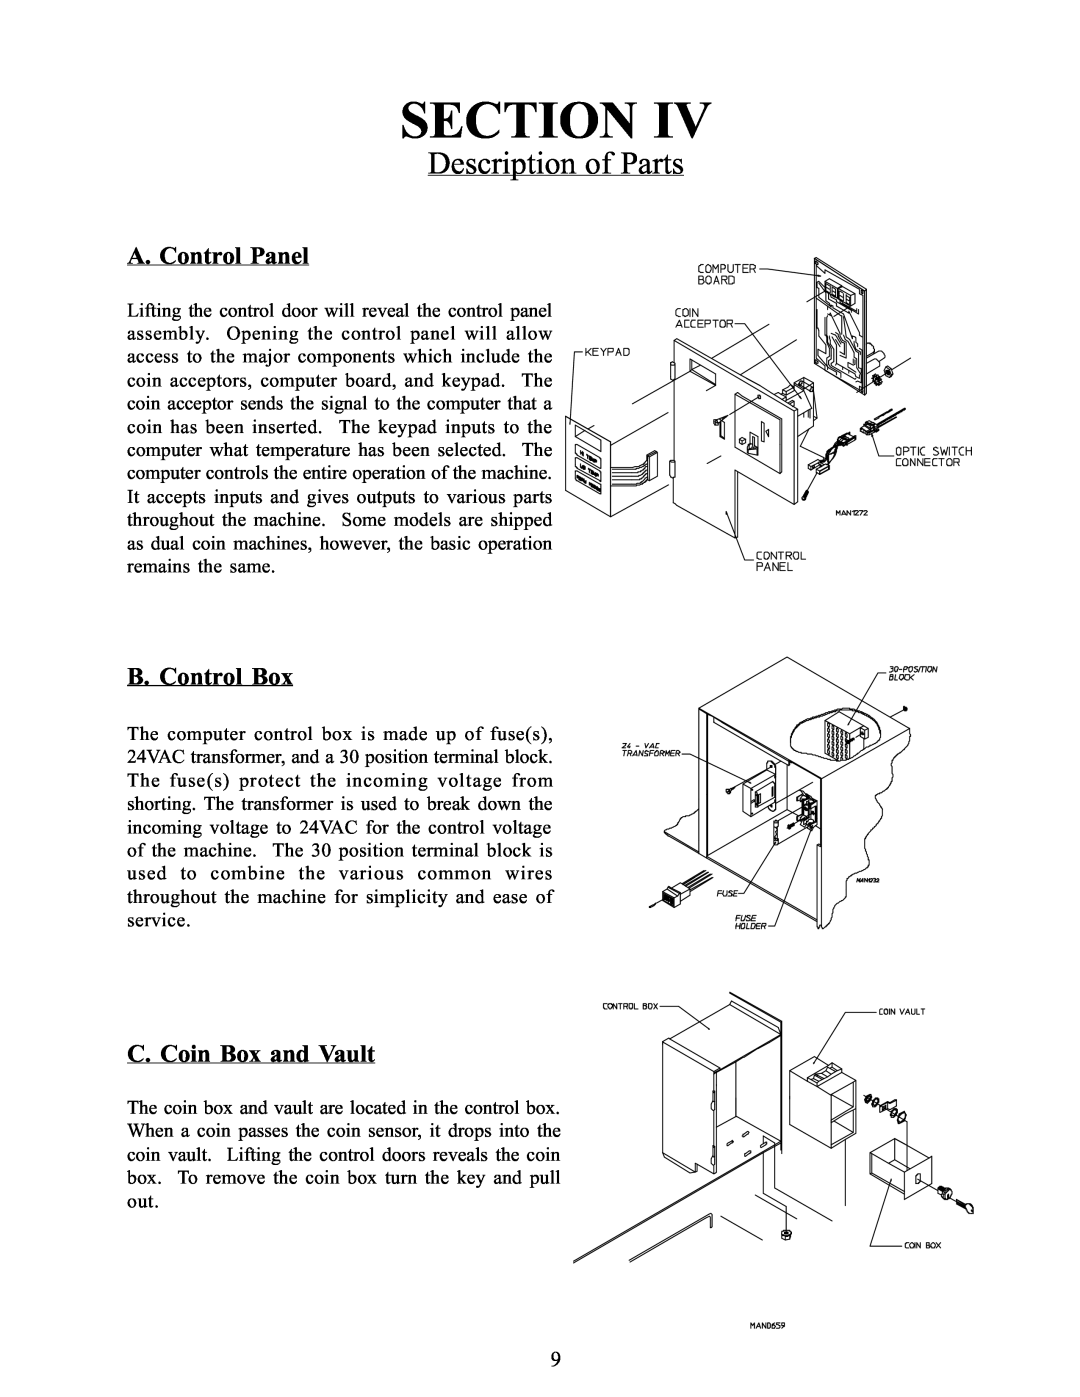 American Dryer Corp WDA-385 Description of Parts, A. Control Panel, B. Control Box, C. Coin Box and Vault, Section 